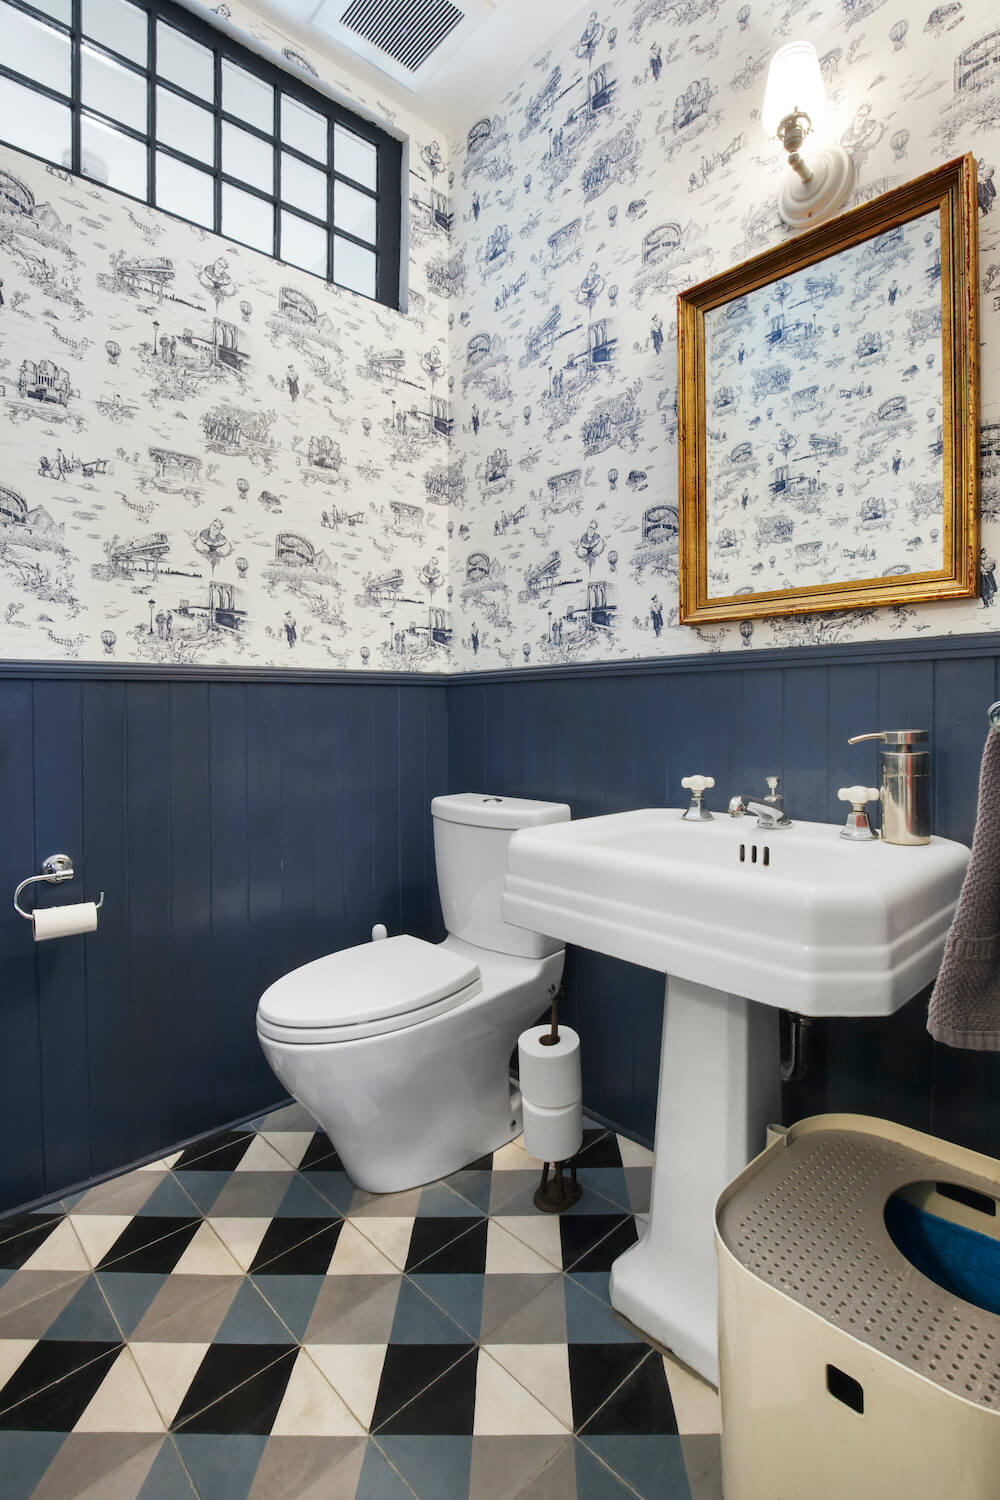 A small bathroom with blue wood wall paneling, white-and-blue patterned wallpaper, and plaid blue-and-white floor tile.